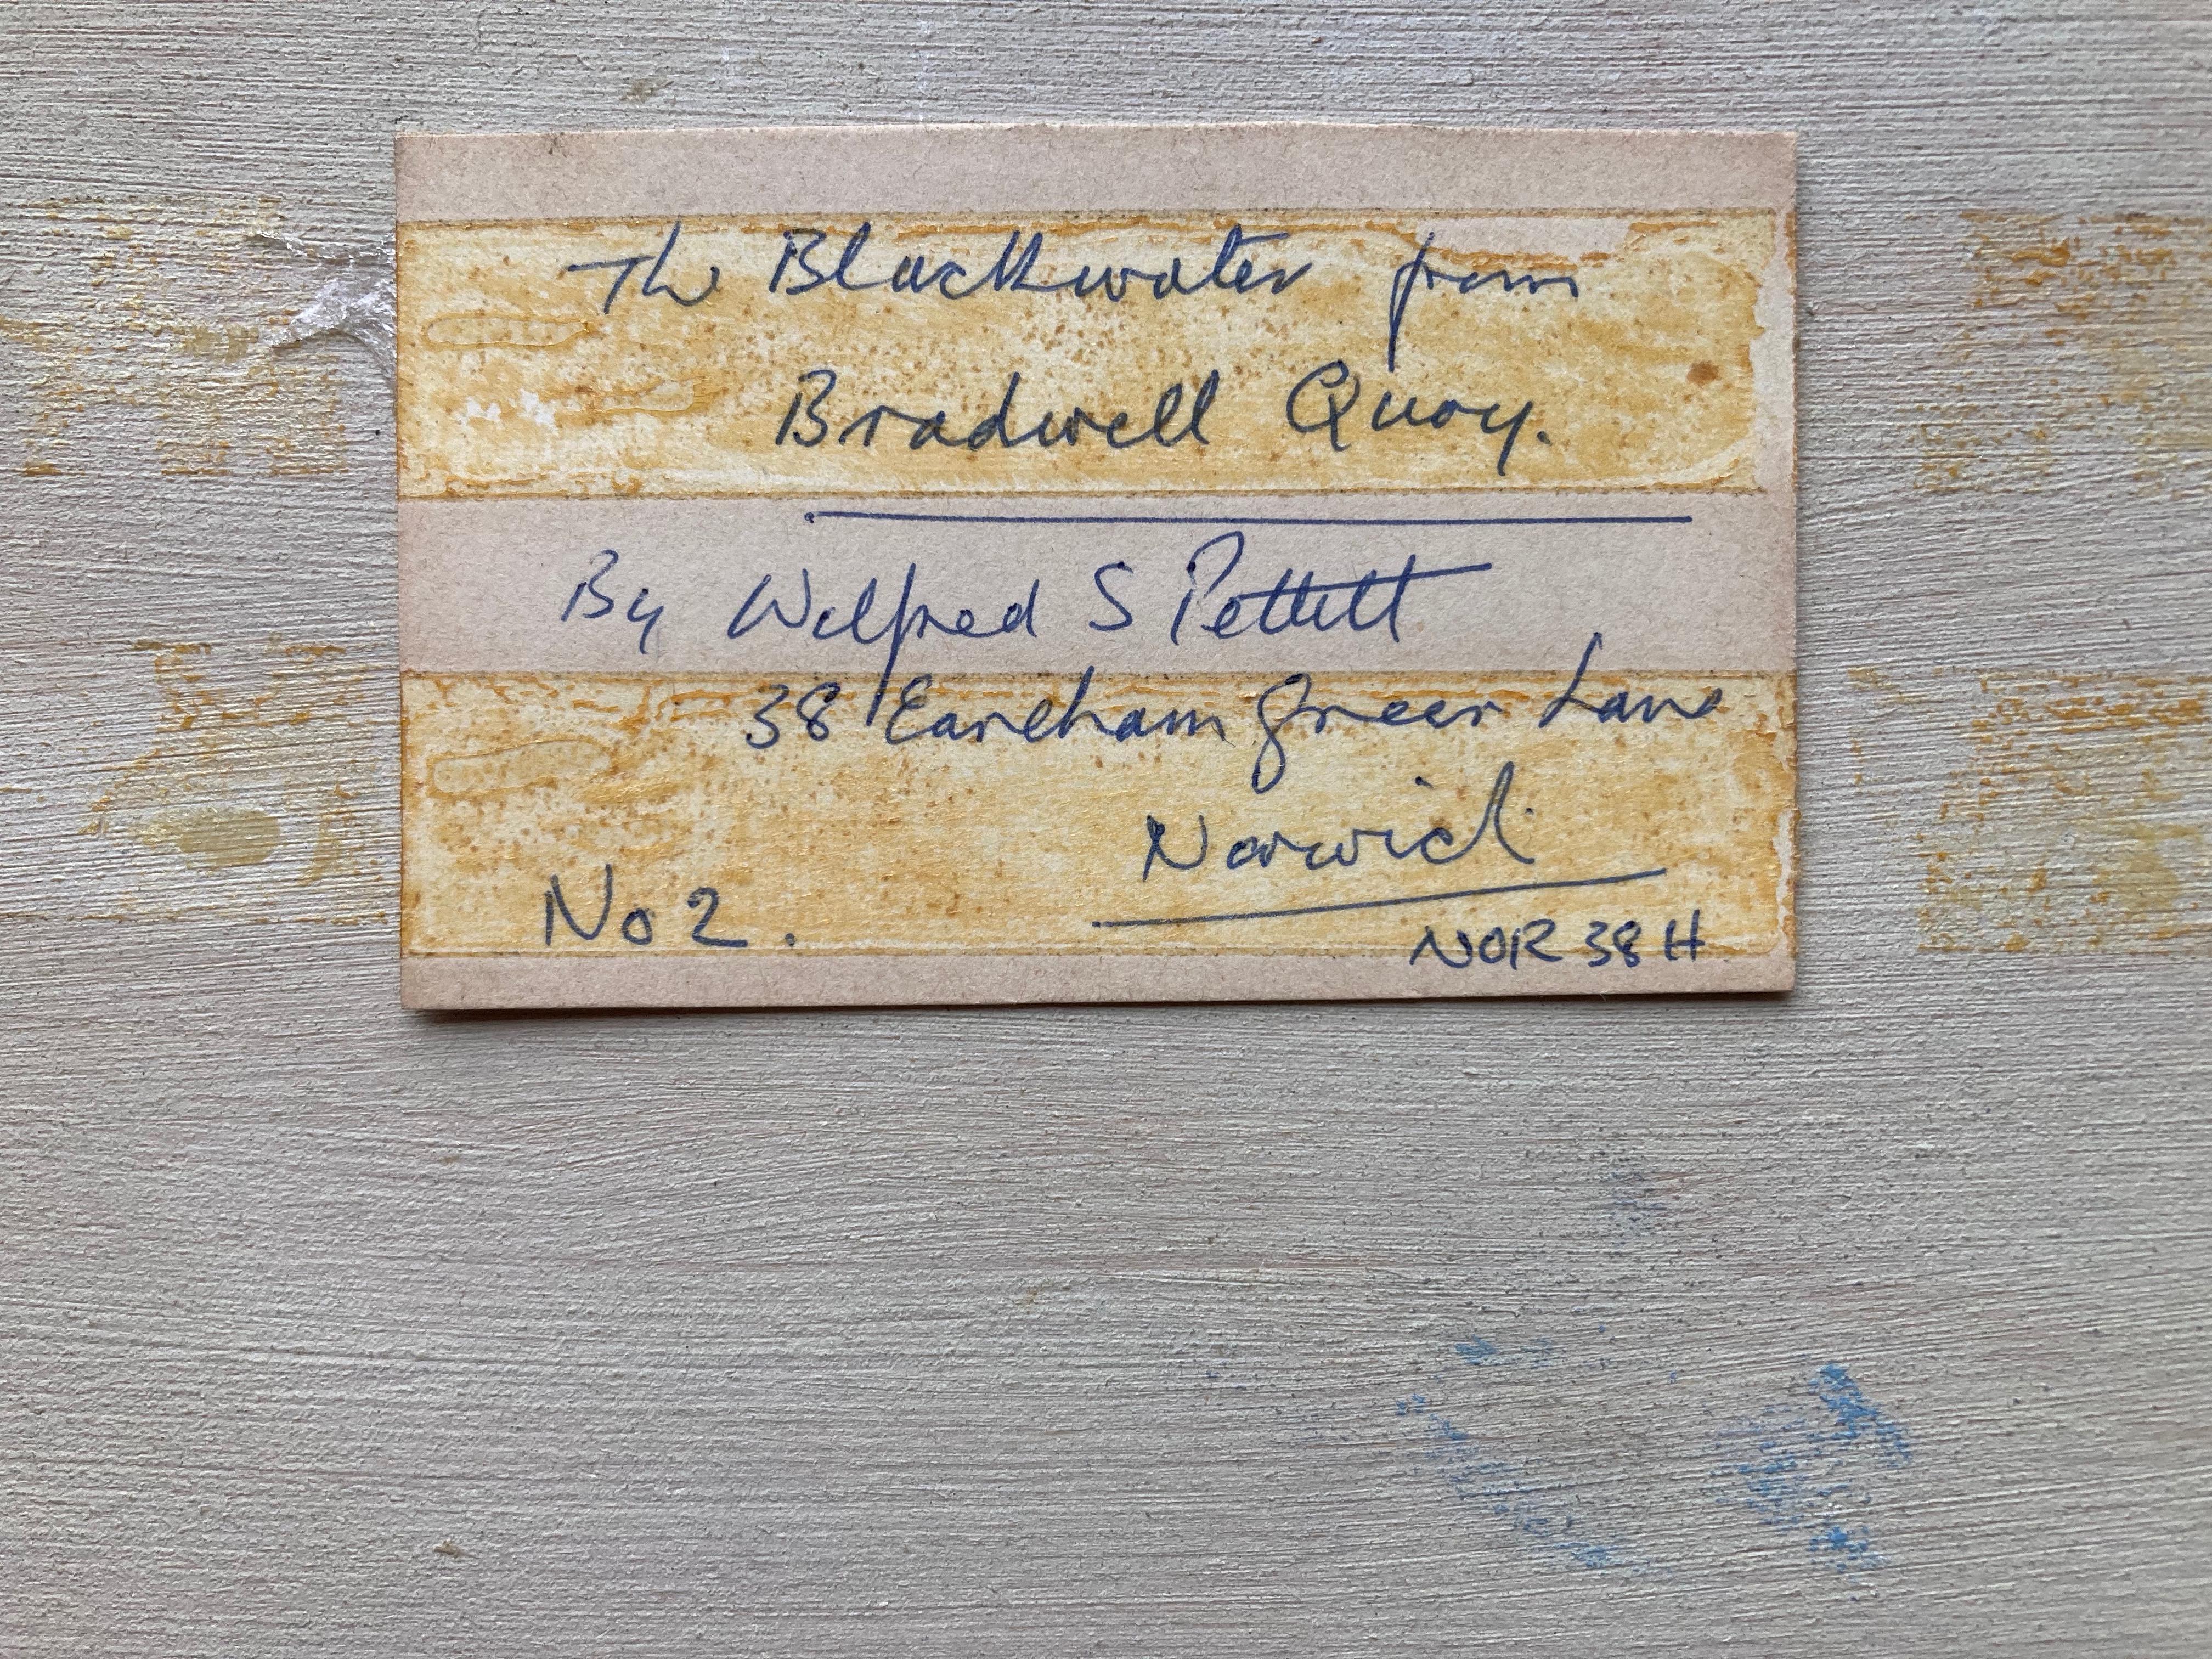 Wilfred Stanley Pettitt, The Blackwater from Bradwell Quay For Sale 2